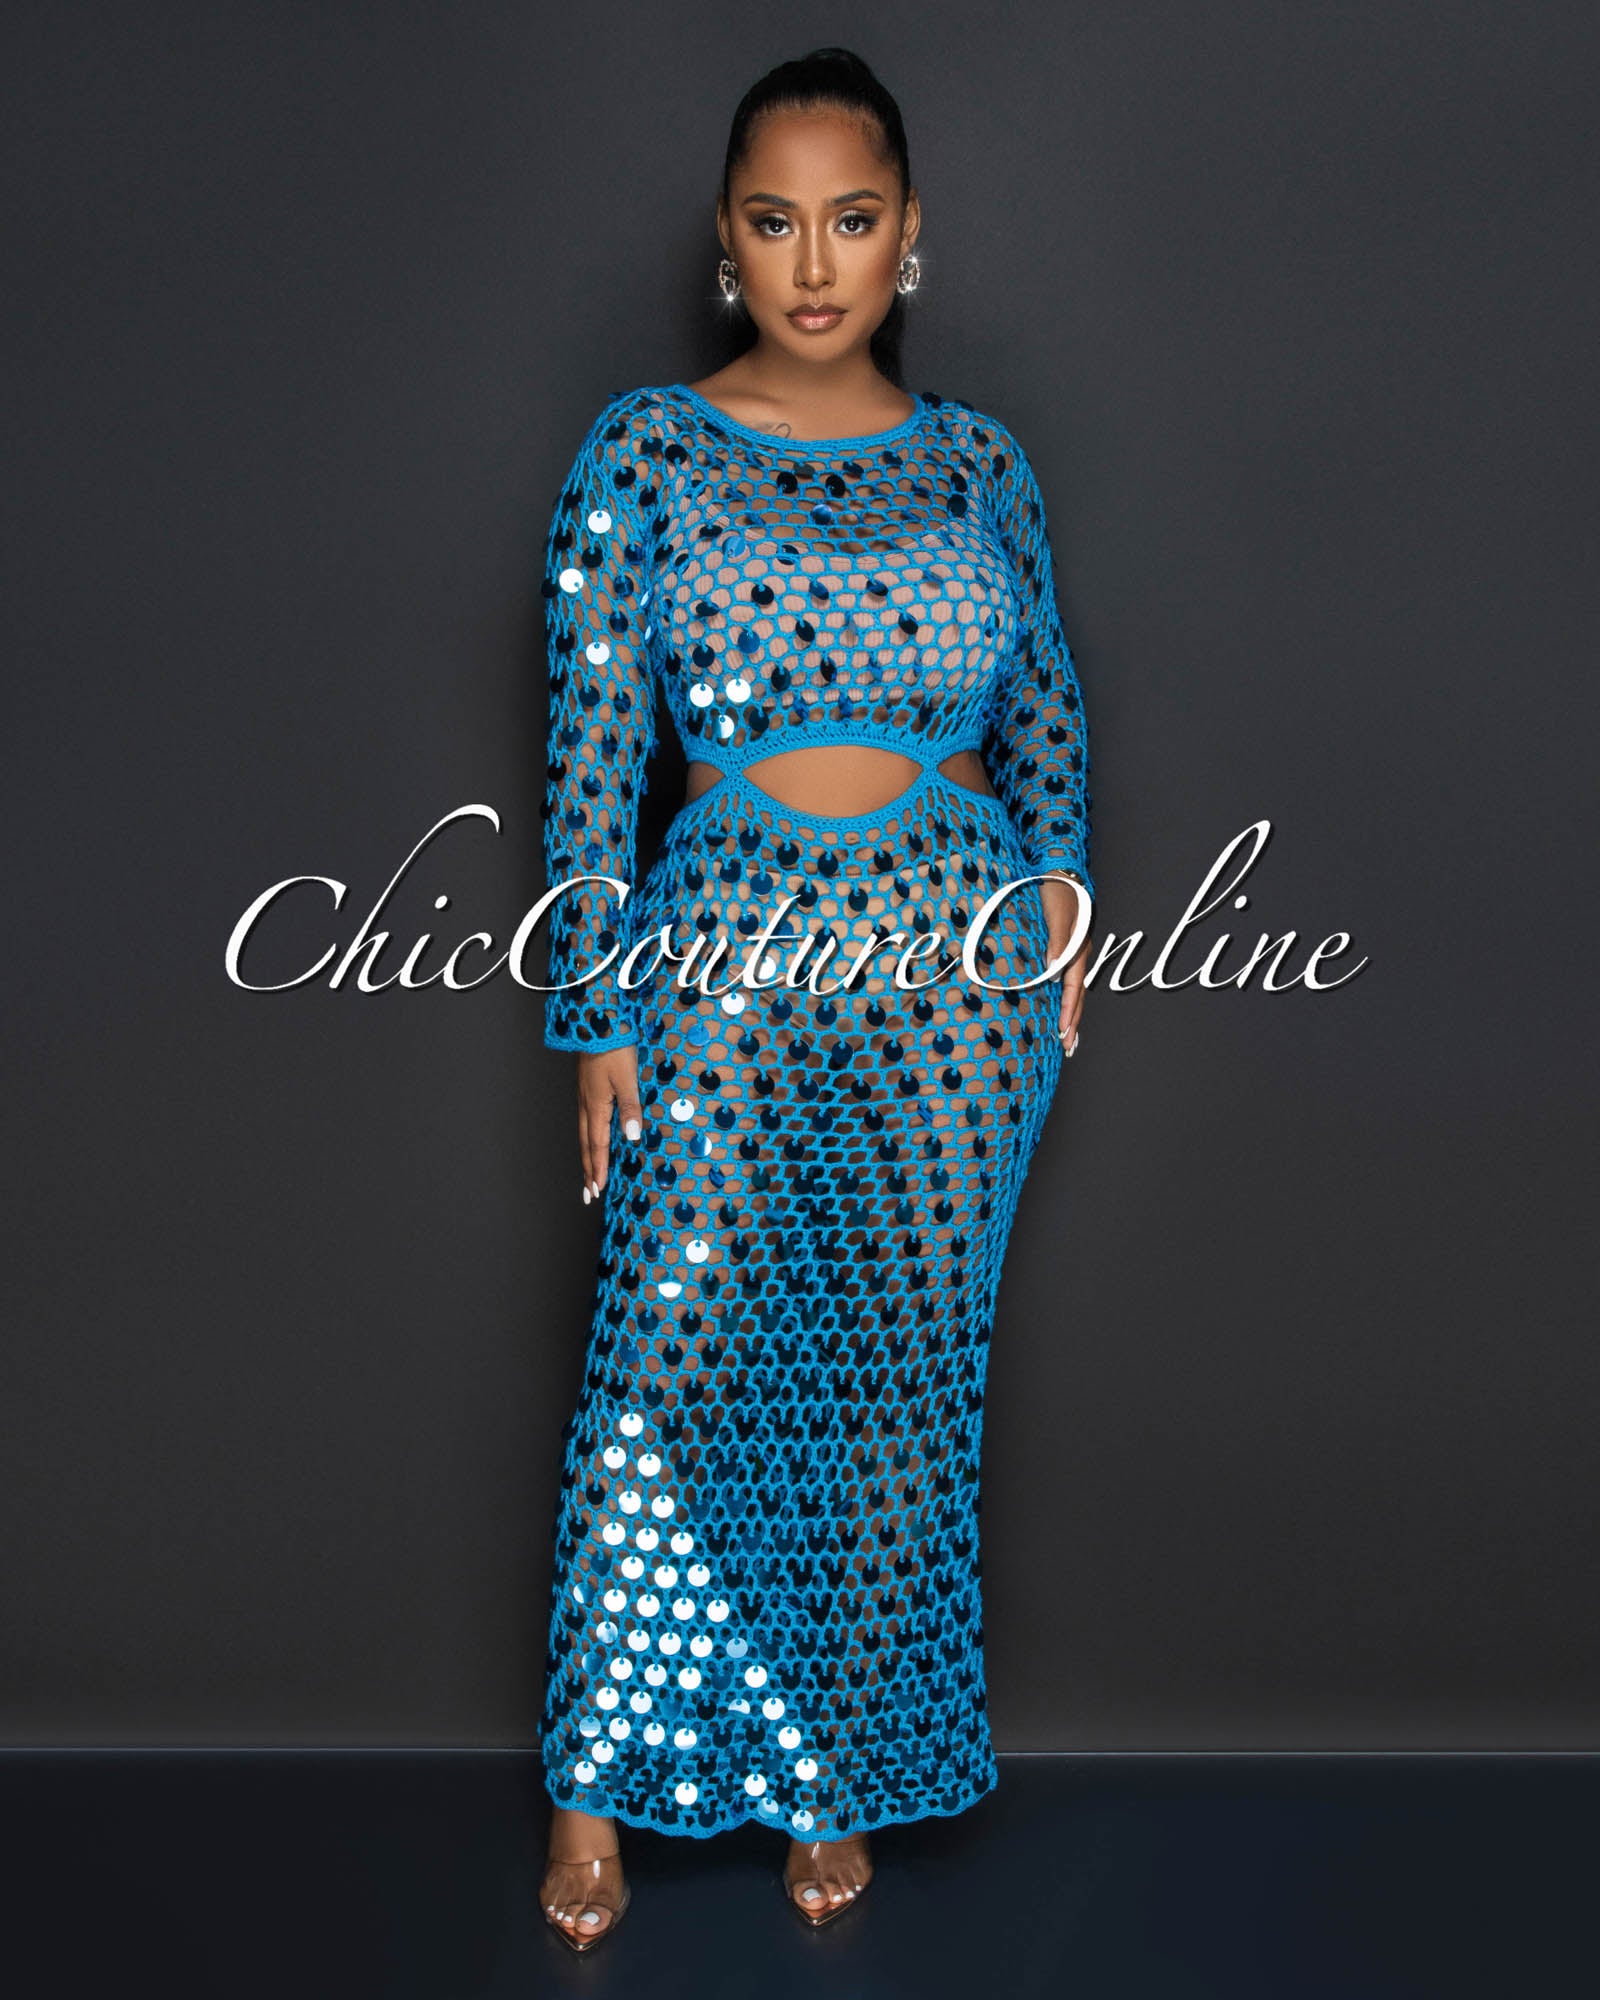 *Candie Turquoise Sequins Crochet Cover-Up Cut-Out Maxi Dress